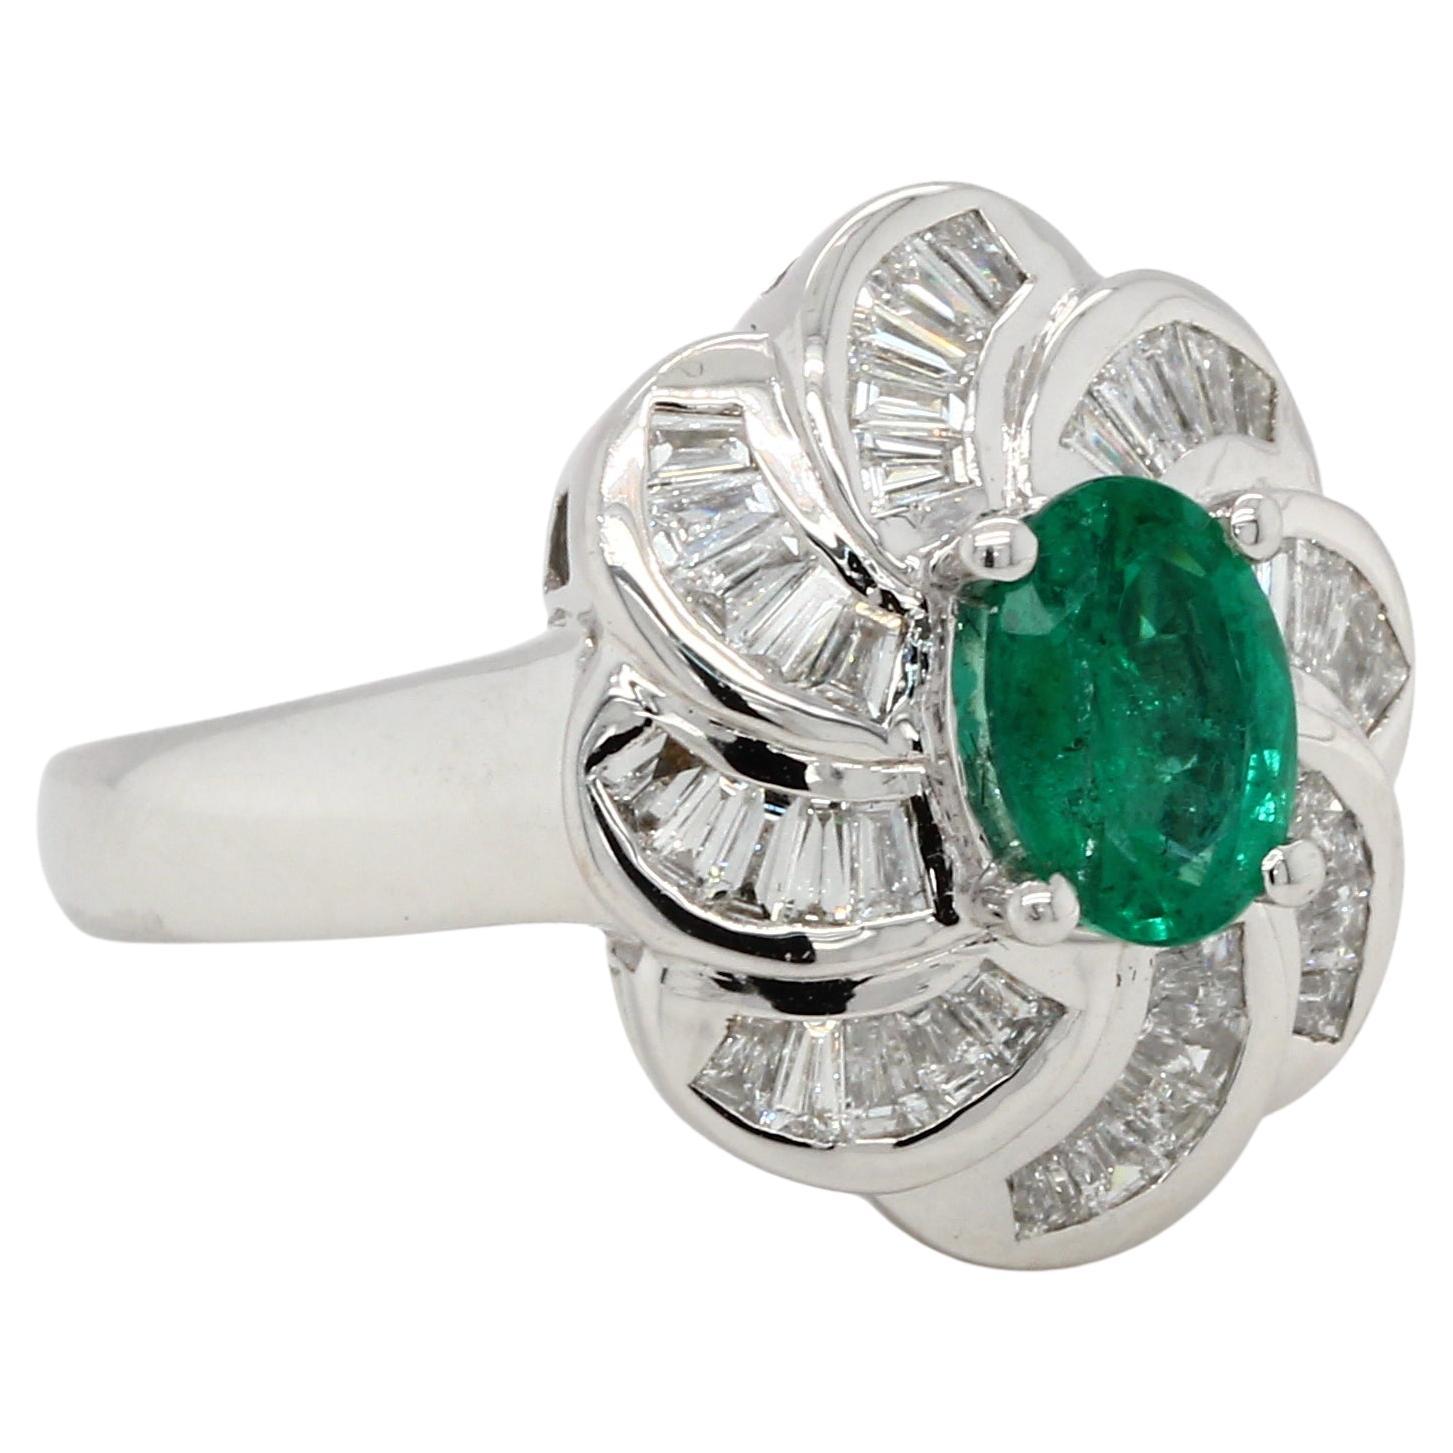 A brand new 18K gold ring with a 0.79 carat emerald and 0.52 carat diamond. This ring features a 0.79 carat emerald oval shape with a 0.52 carat diamond tapper. This ring is made of 18K white gold and weighs 8.15 grams.

Allure Jewellery Mfg. Co.,